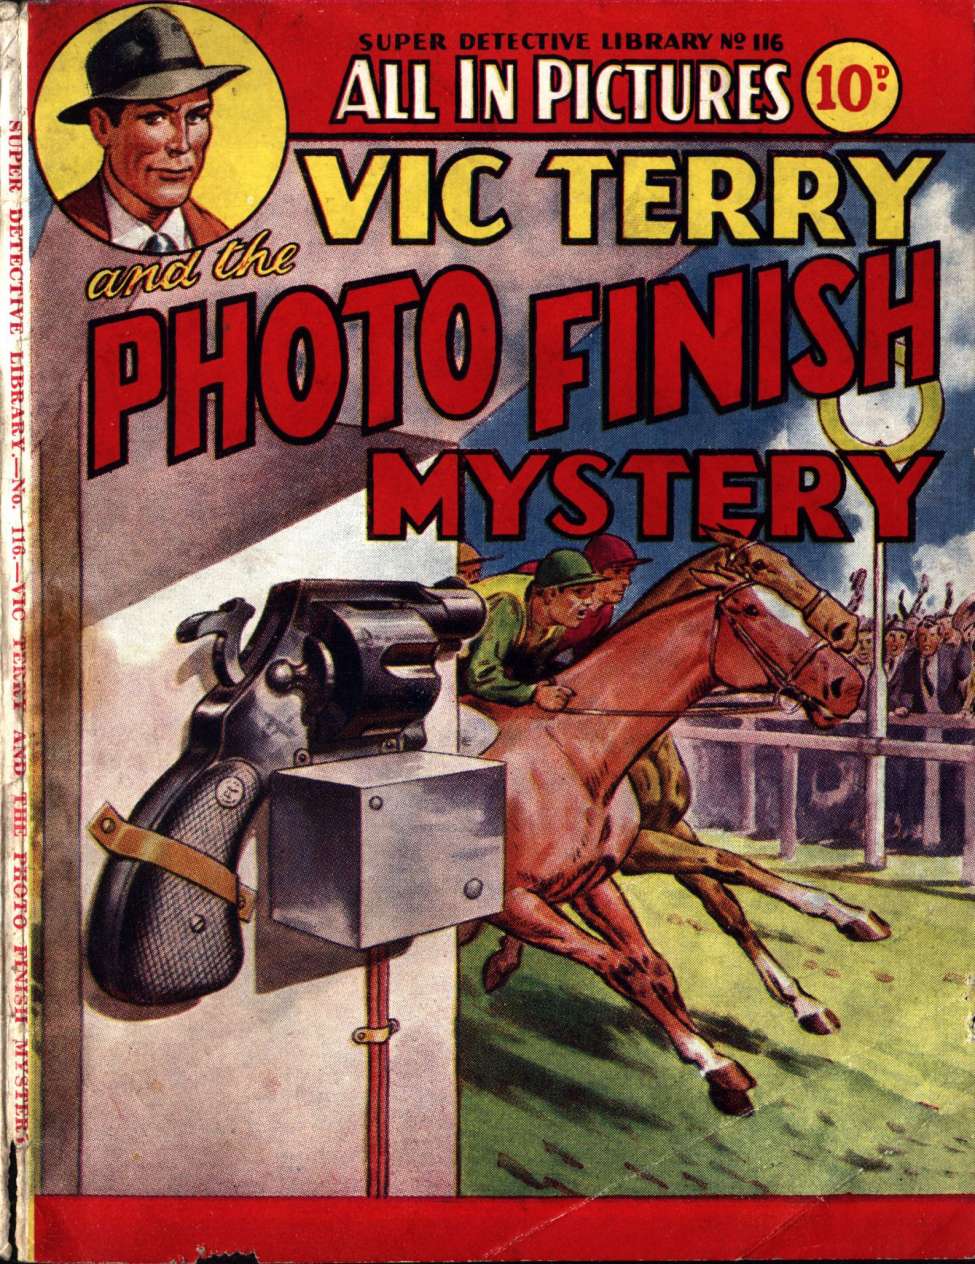 Book Cover For Super Detective Library 116 - The Photo Finish Mystery